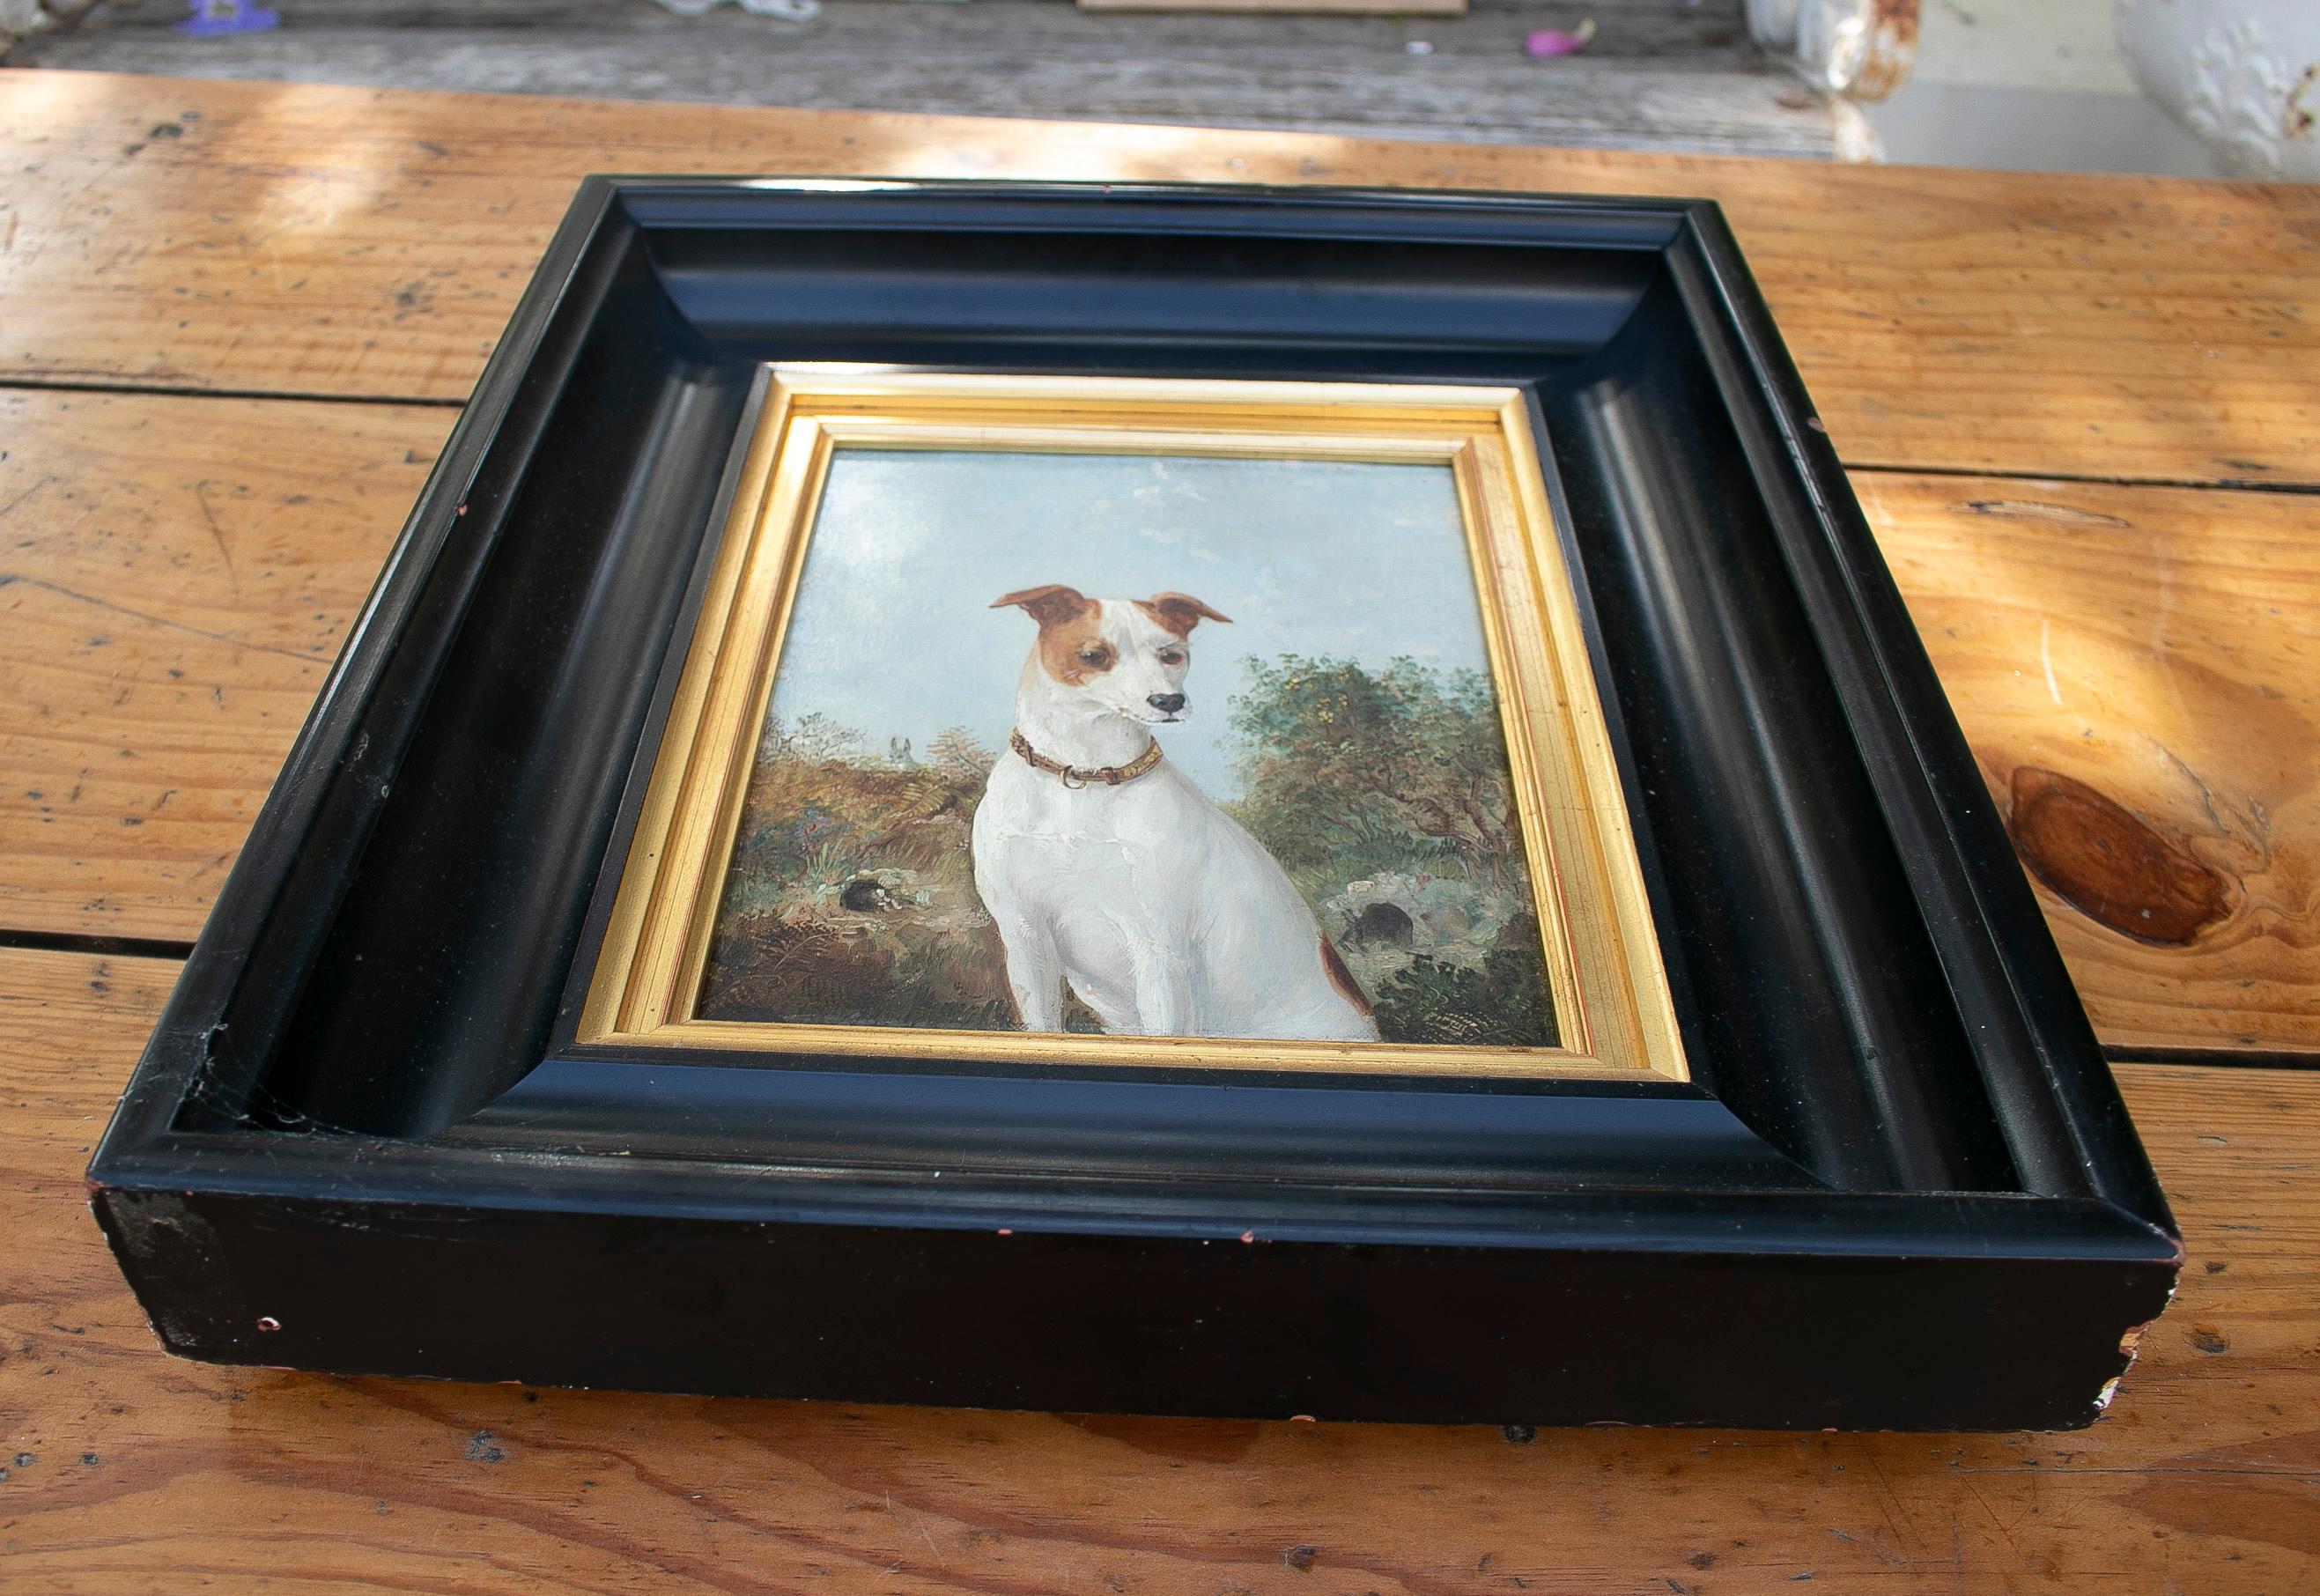 Antique 19th century English oil on canvas hunting dog portrait painting with black and giltwood frame.

Dimensions including frame: 43 x 38 x 8cm.